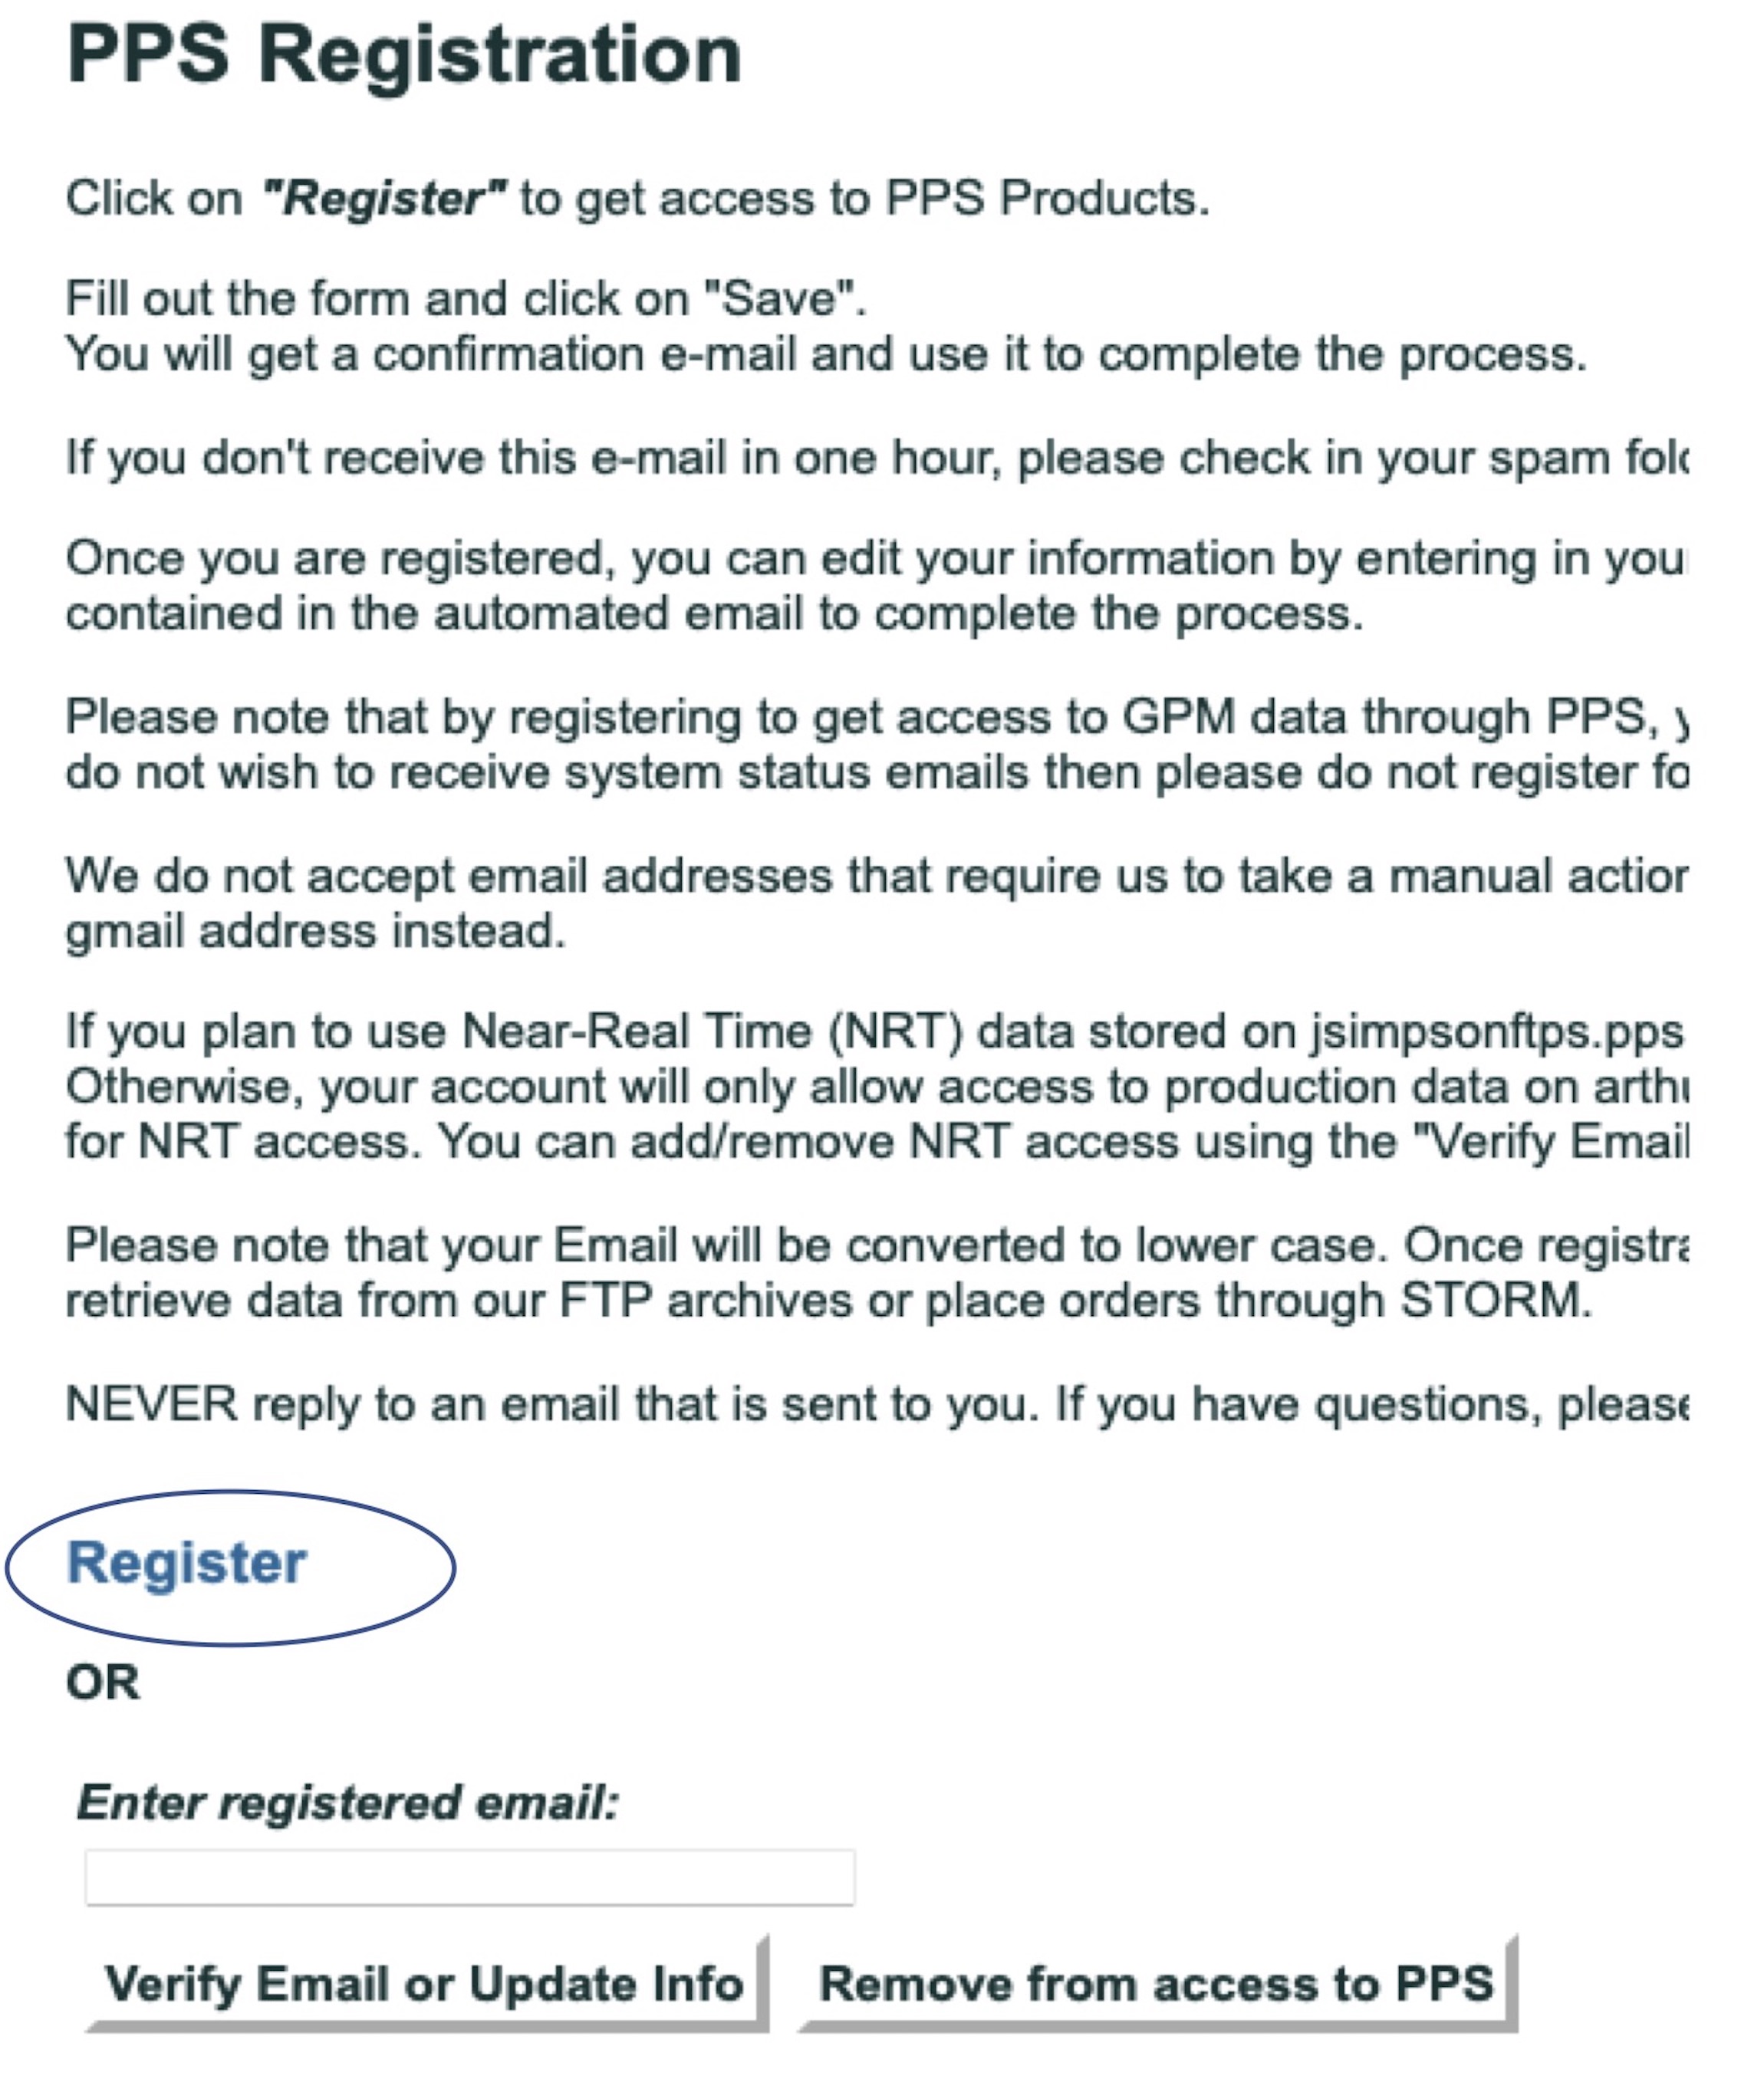 Registration page for IMERG Product